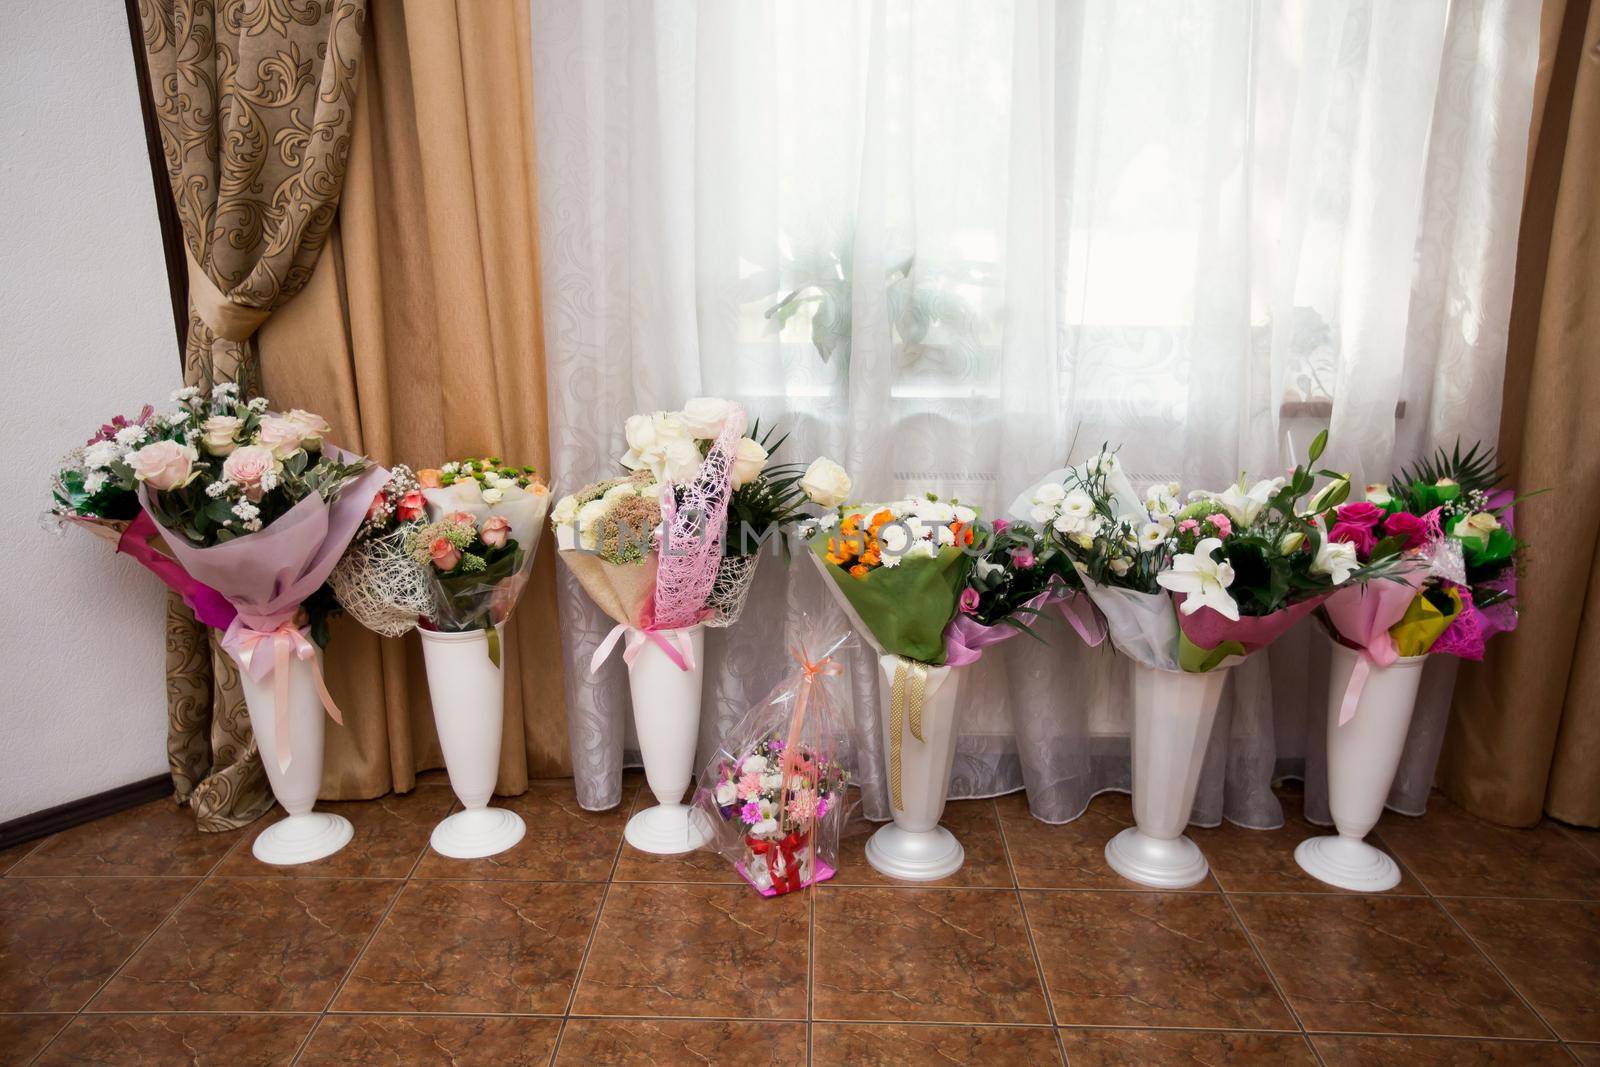 Gifts from bouquets of flowers in vases at the wedding